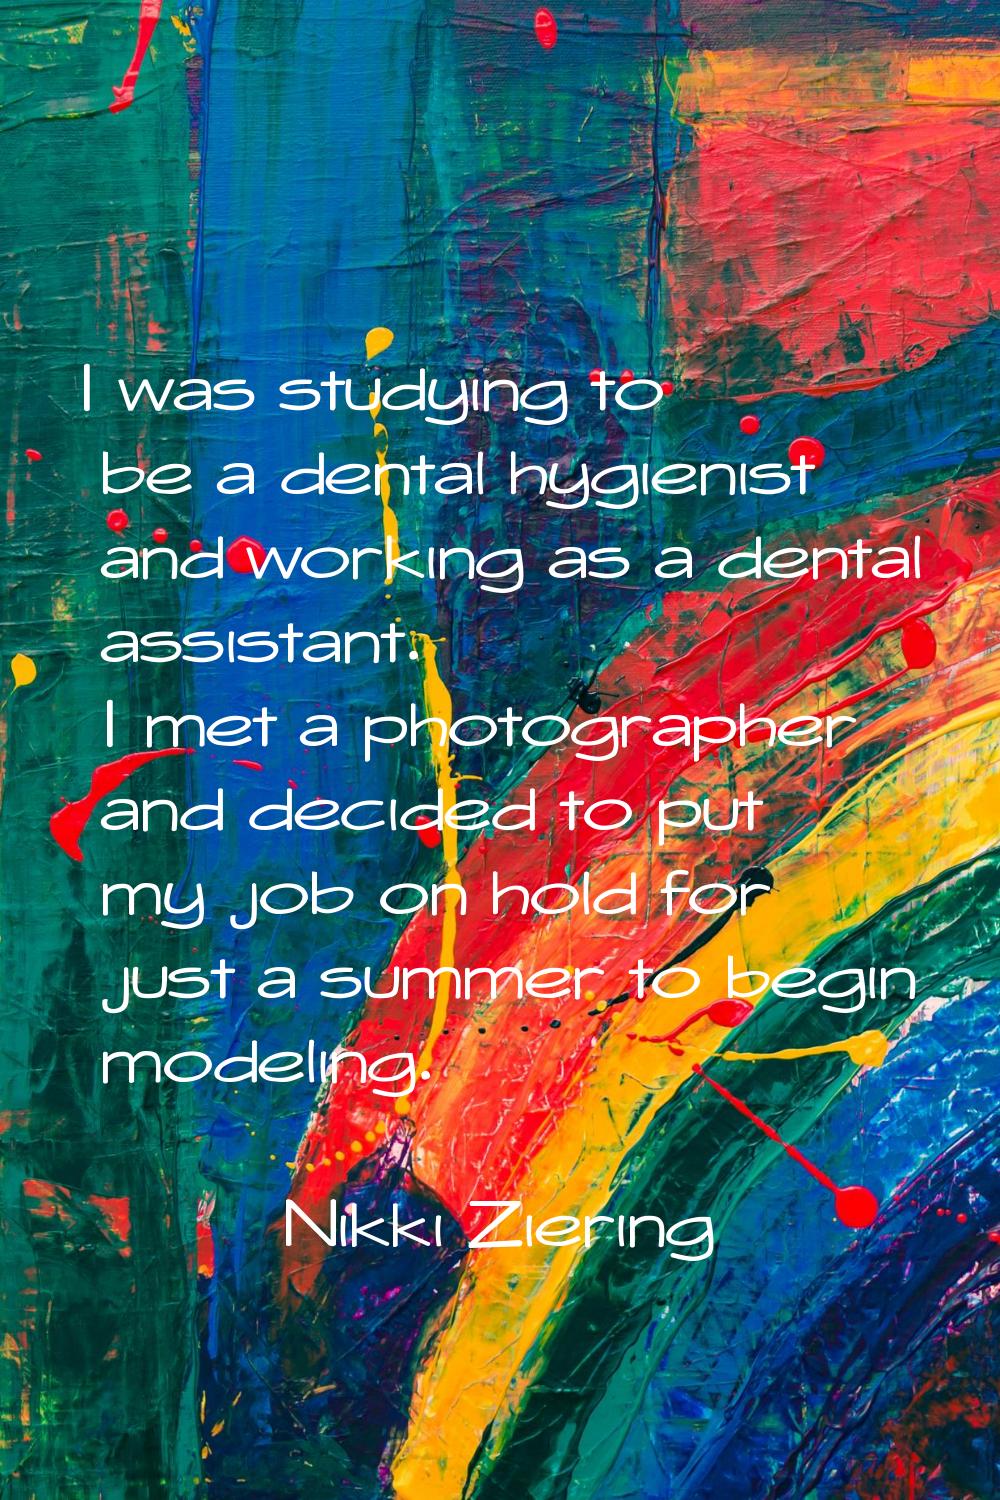 I was studying to be a dental hygienist and working as a dental assistant. I met a photographer and